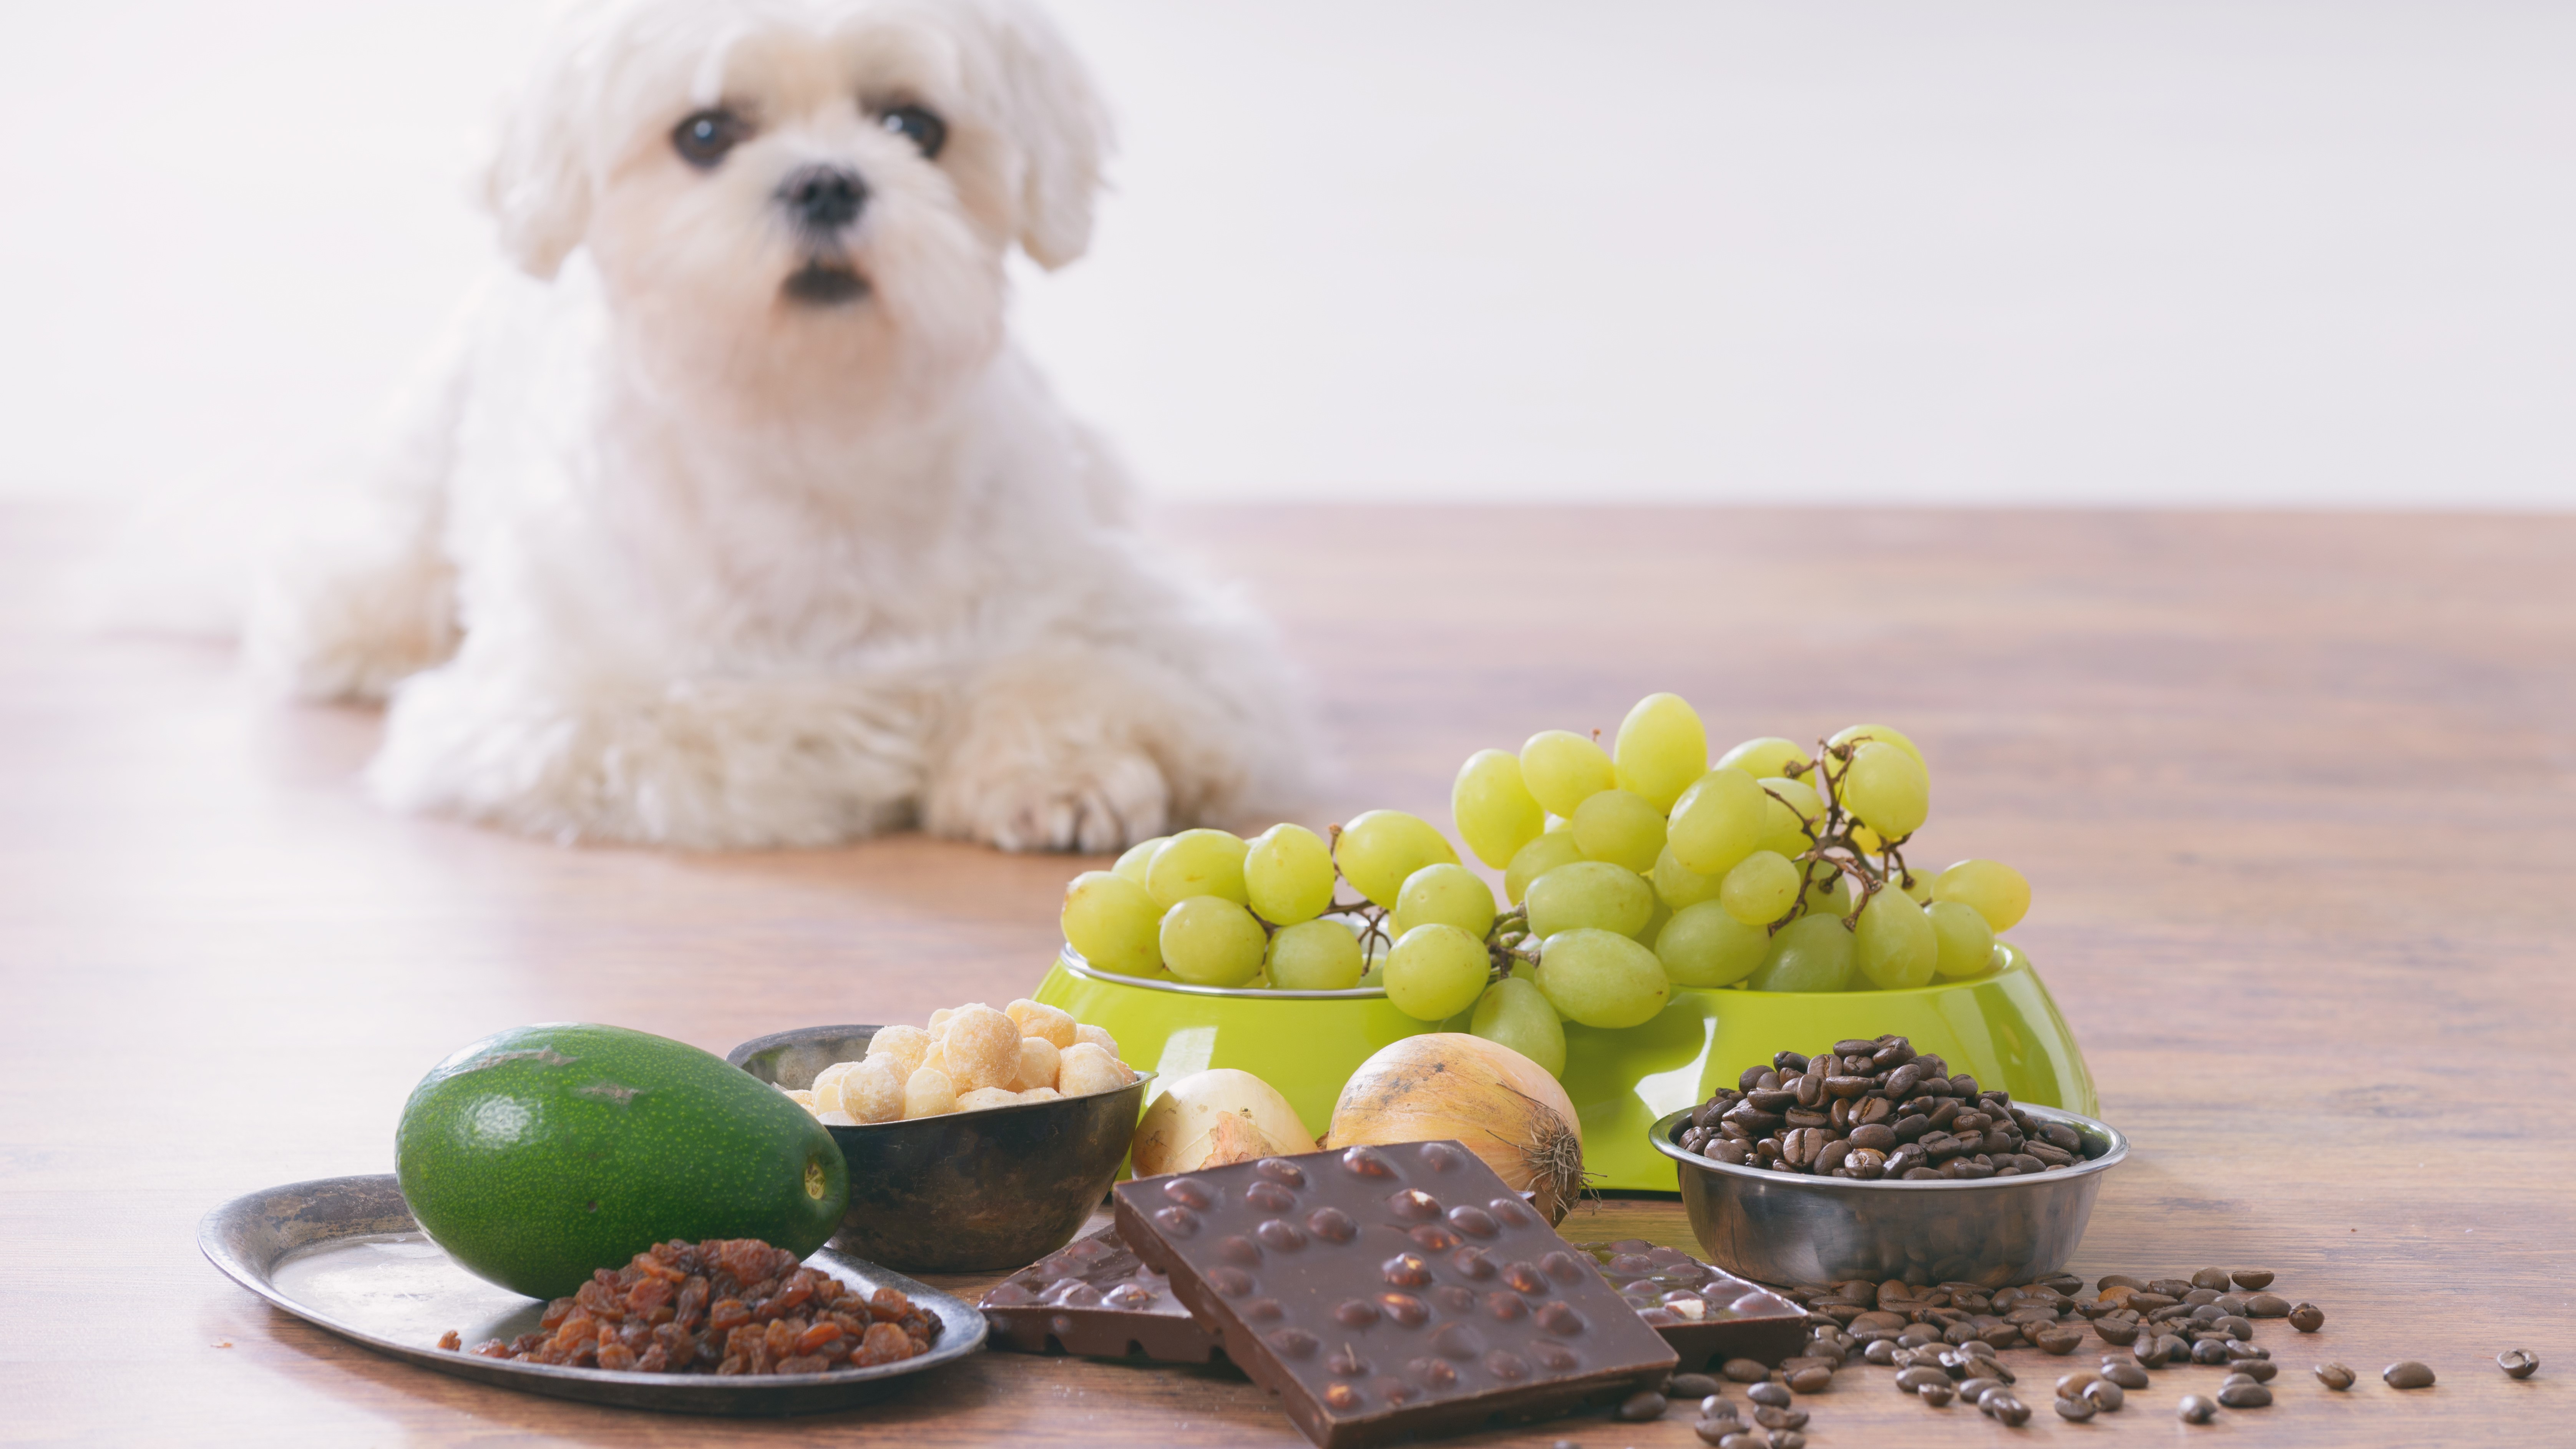 banner of dog with toxic food in foreground including grapes and chocolate